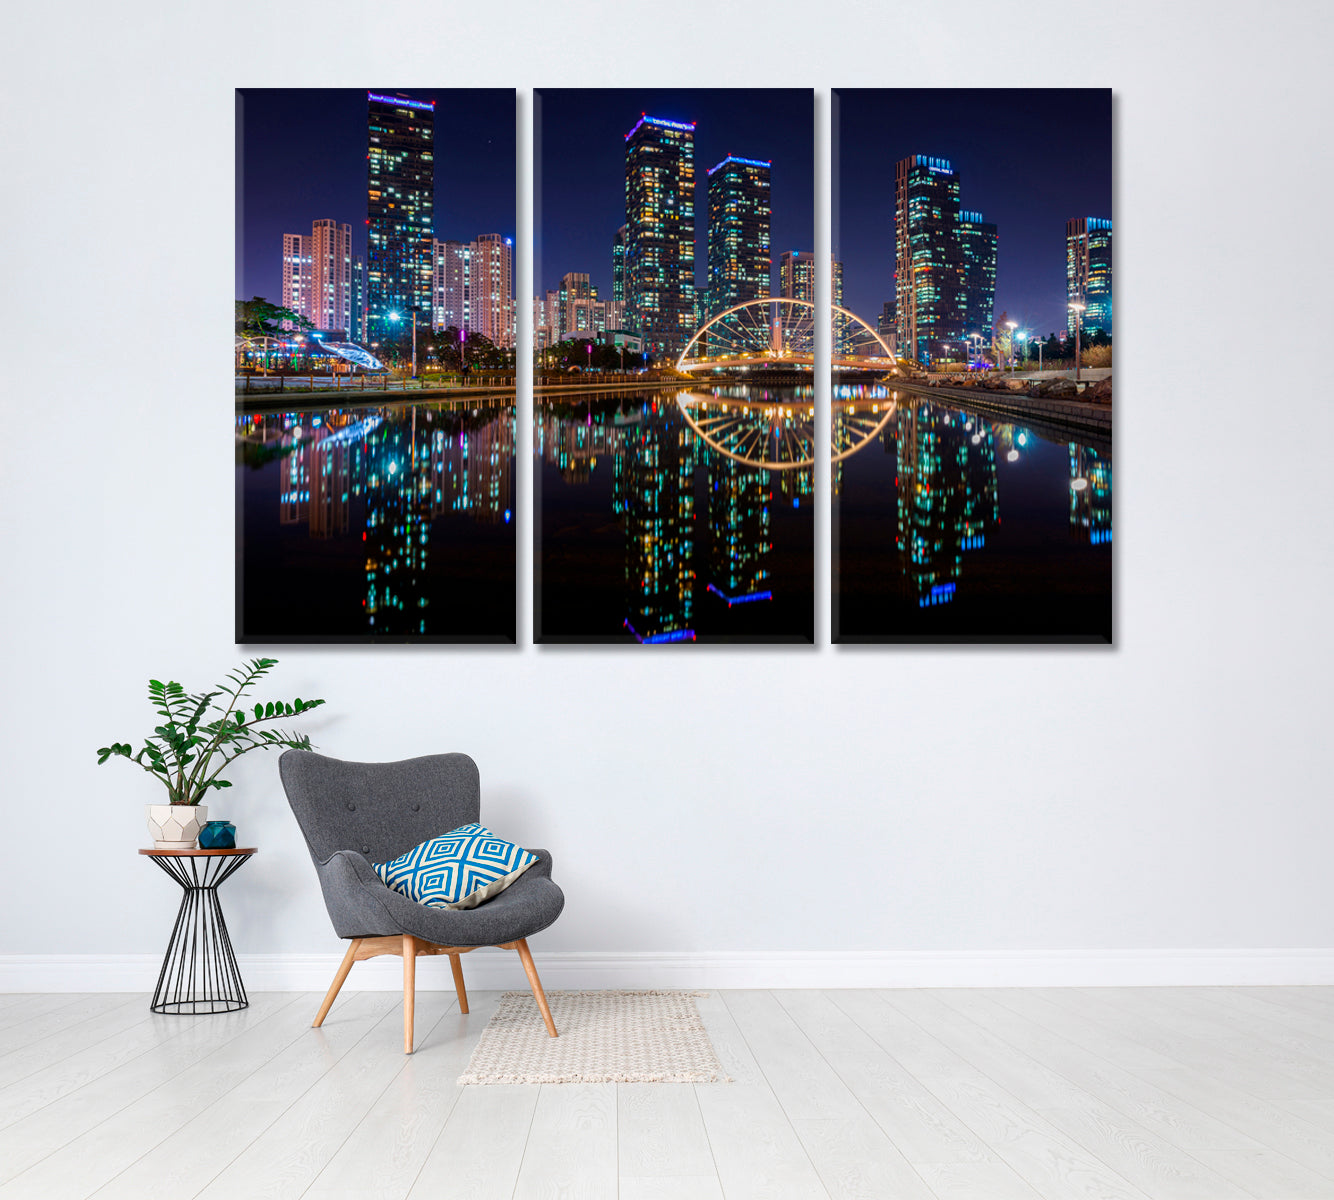 Songdo Central Park at Night in Incheon South Korea Canvas Print ArtLexy 3 Panels 36"x24" inches 